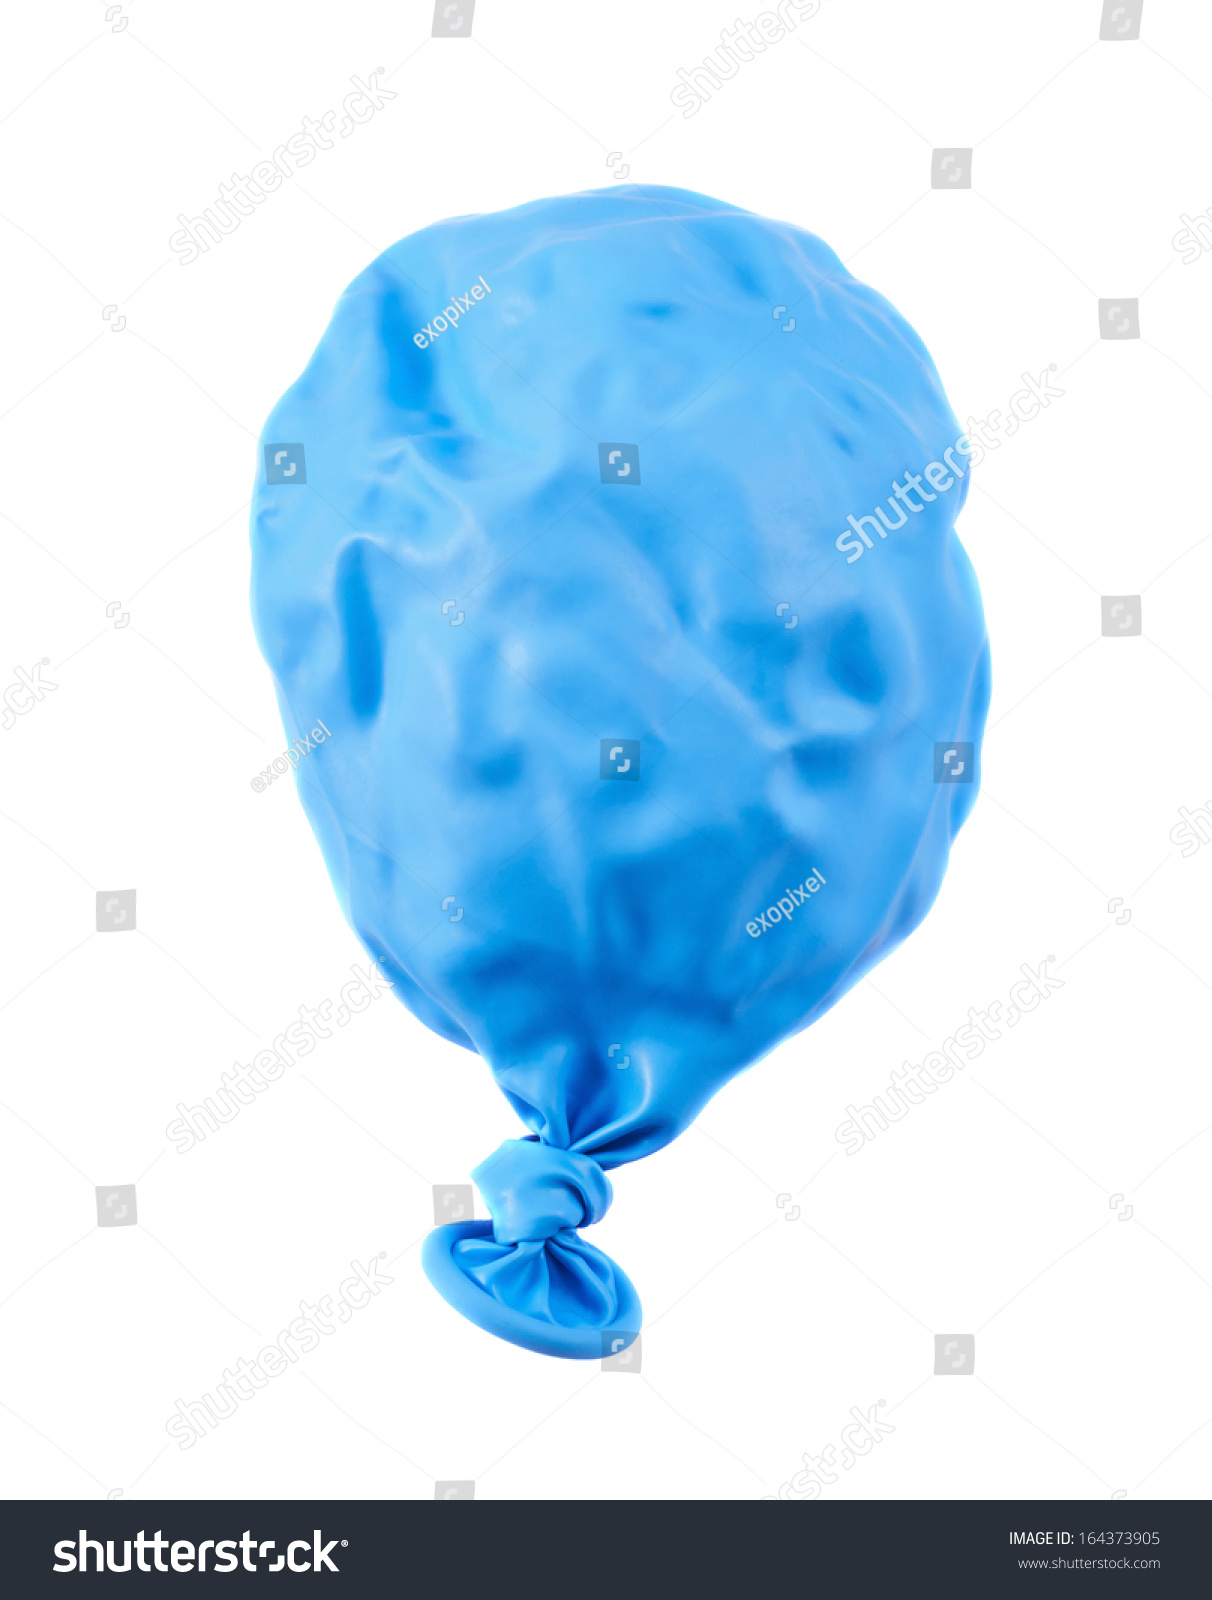 Deflated Blue Balloon Isolated Over White Background Stock Photo ...